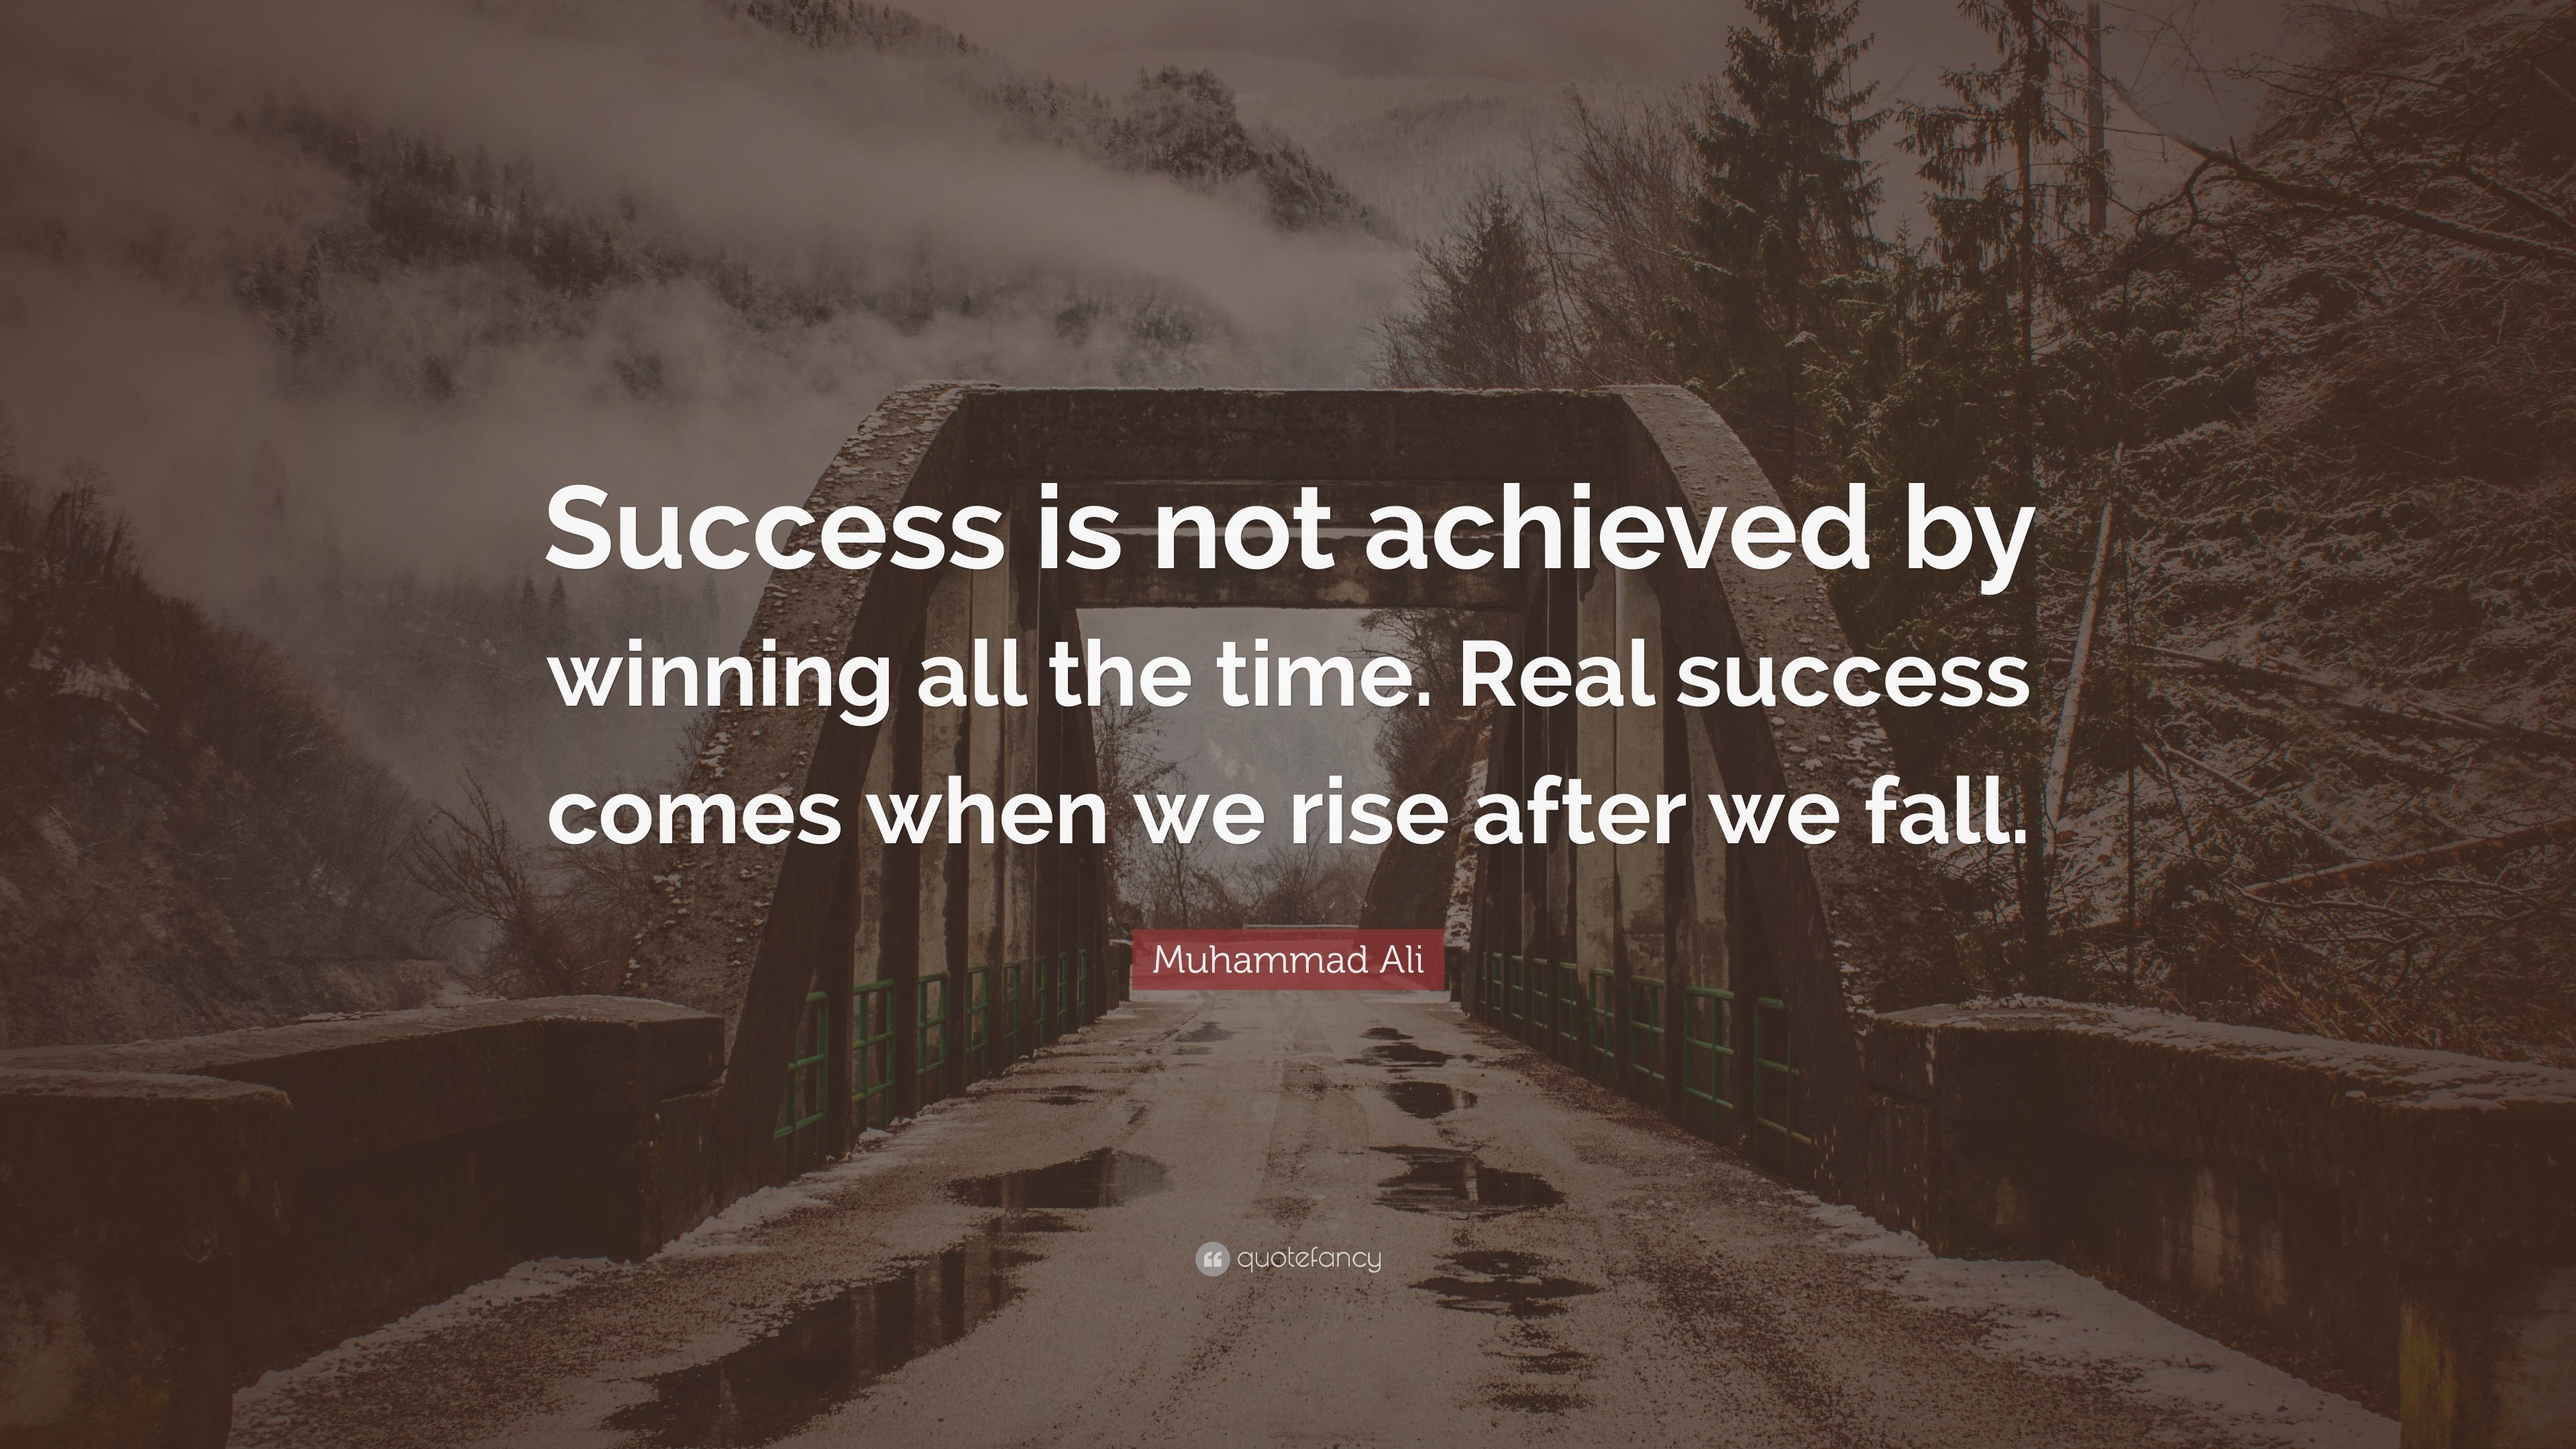 Muhammad Ali Quote: “Success is not achieved by winning all the time